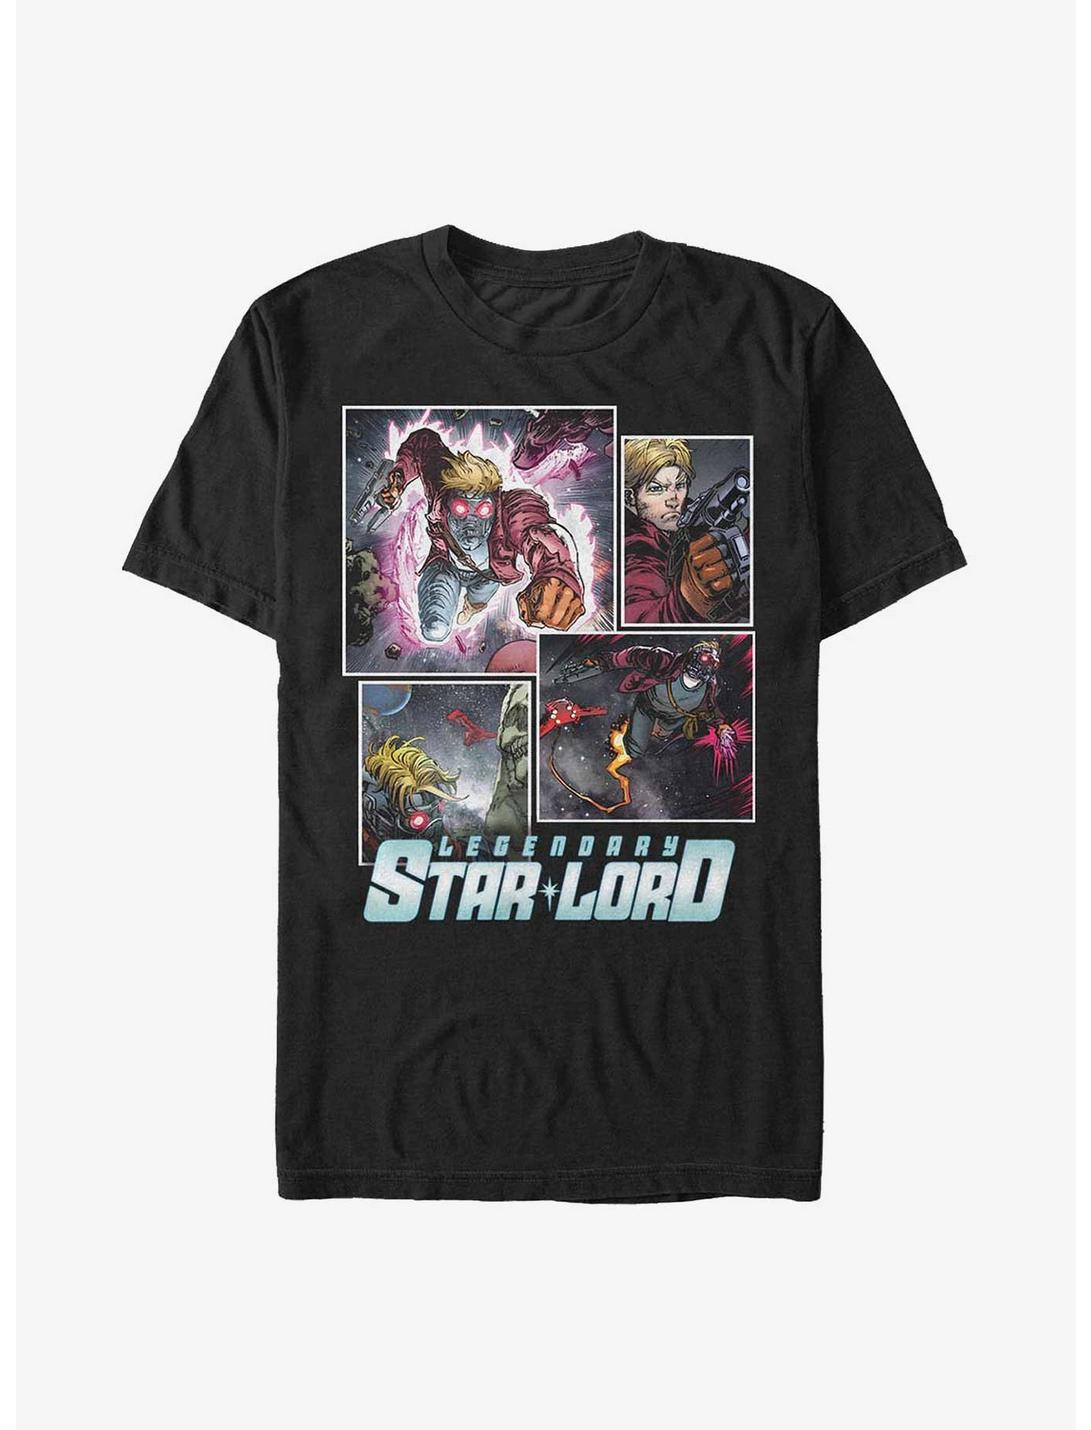 Marvel Guardians of the Galaxy Legendary Star-Lord T-Shirt, BLACK, hi-res